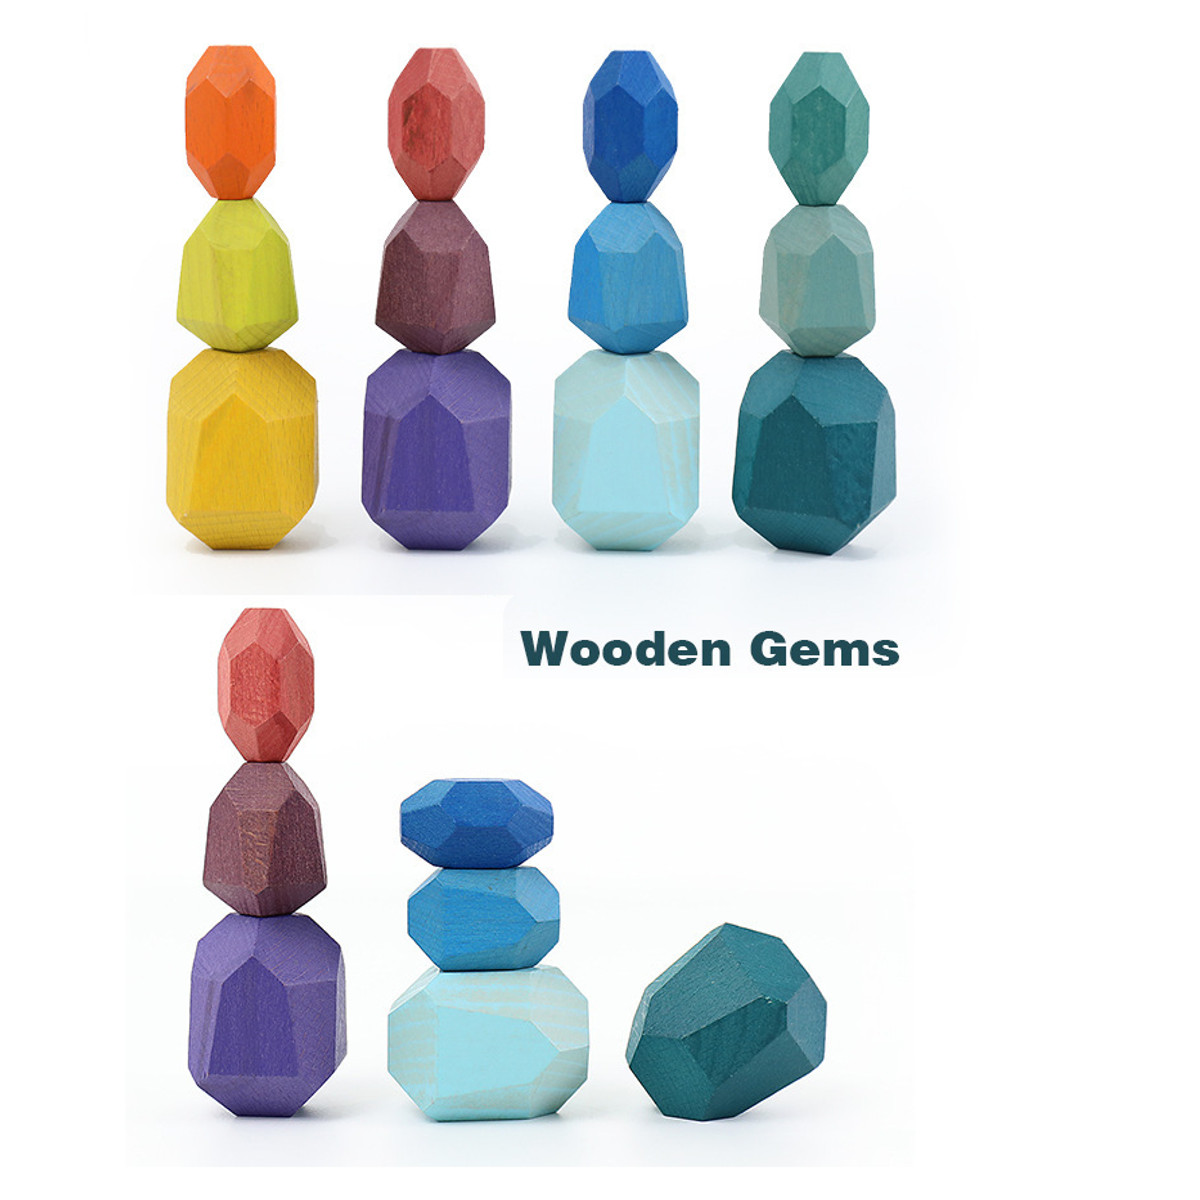 101626-Pcs-Wood-Colorful-Stone-Stacking-Game-Building-Block-Education-Set-Toy-for-Kids-Gift-1887123-9